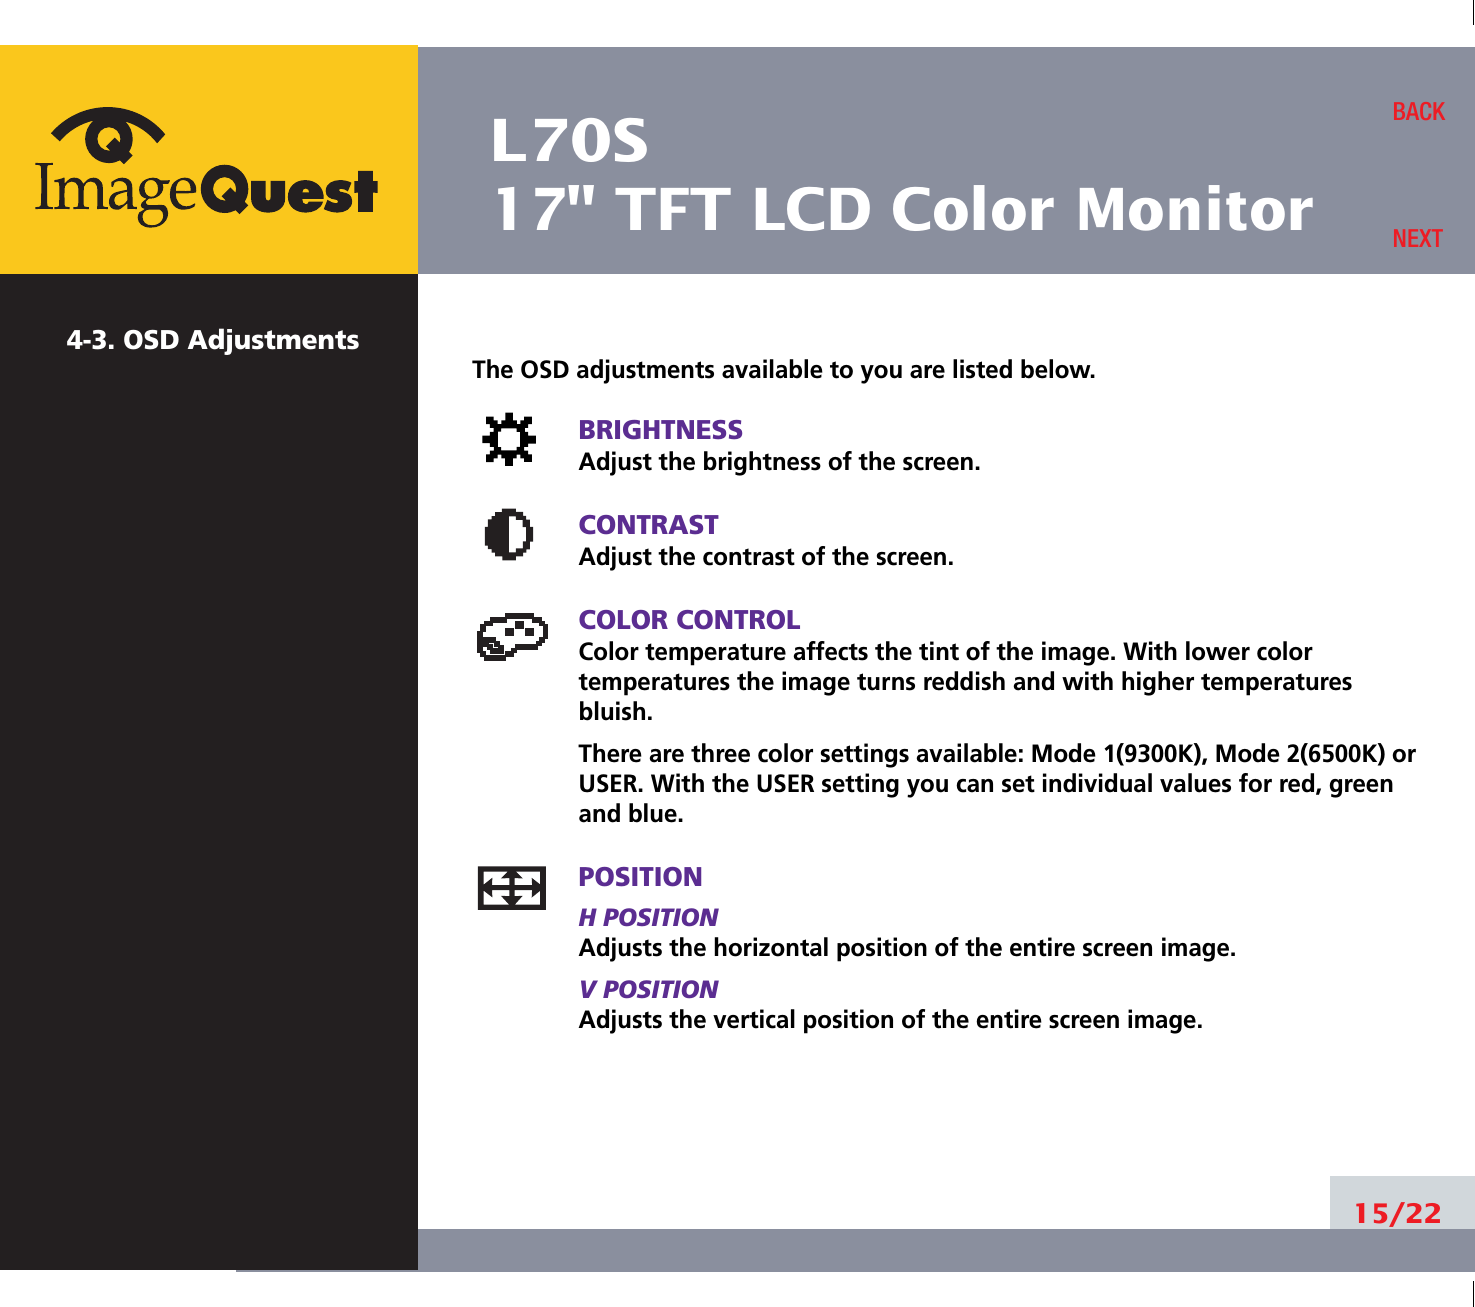 L70S17&quot; TFT LCD Color Monitor15/22BACKNEXT4-3. OSD AdjustmentsThe OSD adjustments available to you are listed below.BRIGHTNESSAdjust the brightness of the screen.CONTRASTAdjust the contrast of the screen.COLOR CONTROLColor temperature affects the tint of the image. With lower color temperatures the image turns reddish and with higher temperatures bluish.There are three color settings available: Mode 1(9300K), Mode 2(6500K) orUSER. With the USER setting you can set individual values for red, greenand blue.POSITIONH POSITIONAdjusts the horizontal position of the entire screen image.V POSITIONAdjusts the vertical position of the entire screen image.